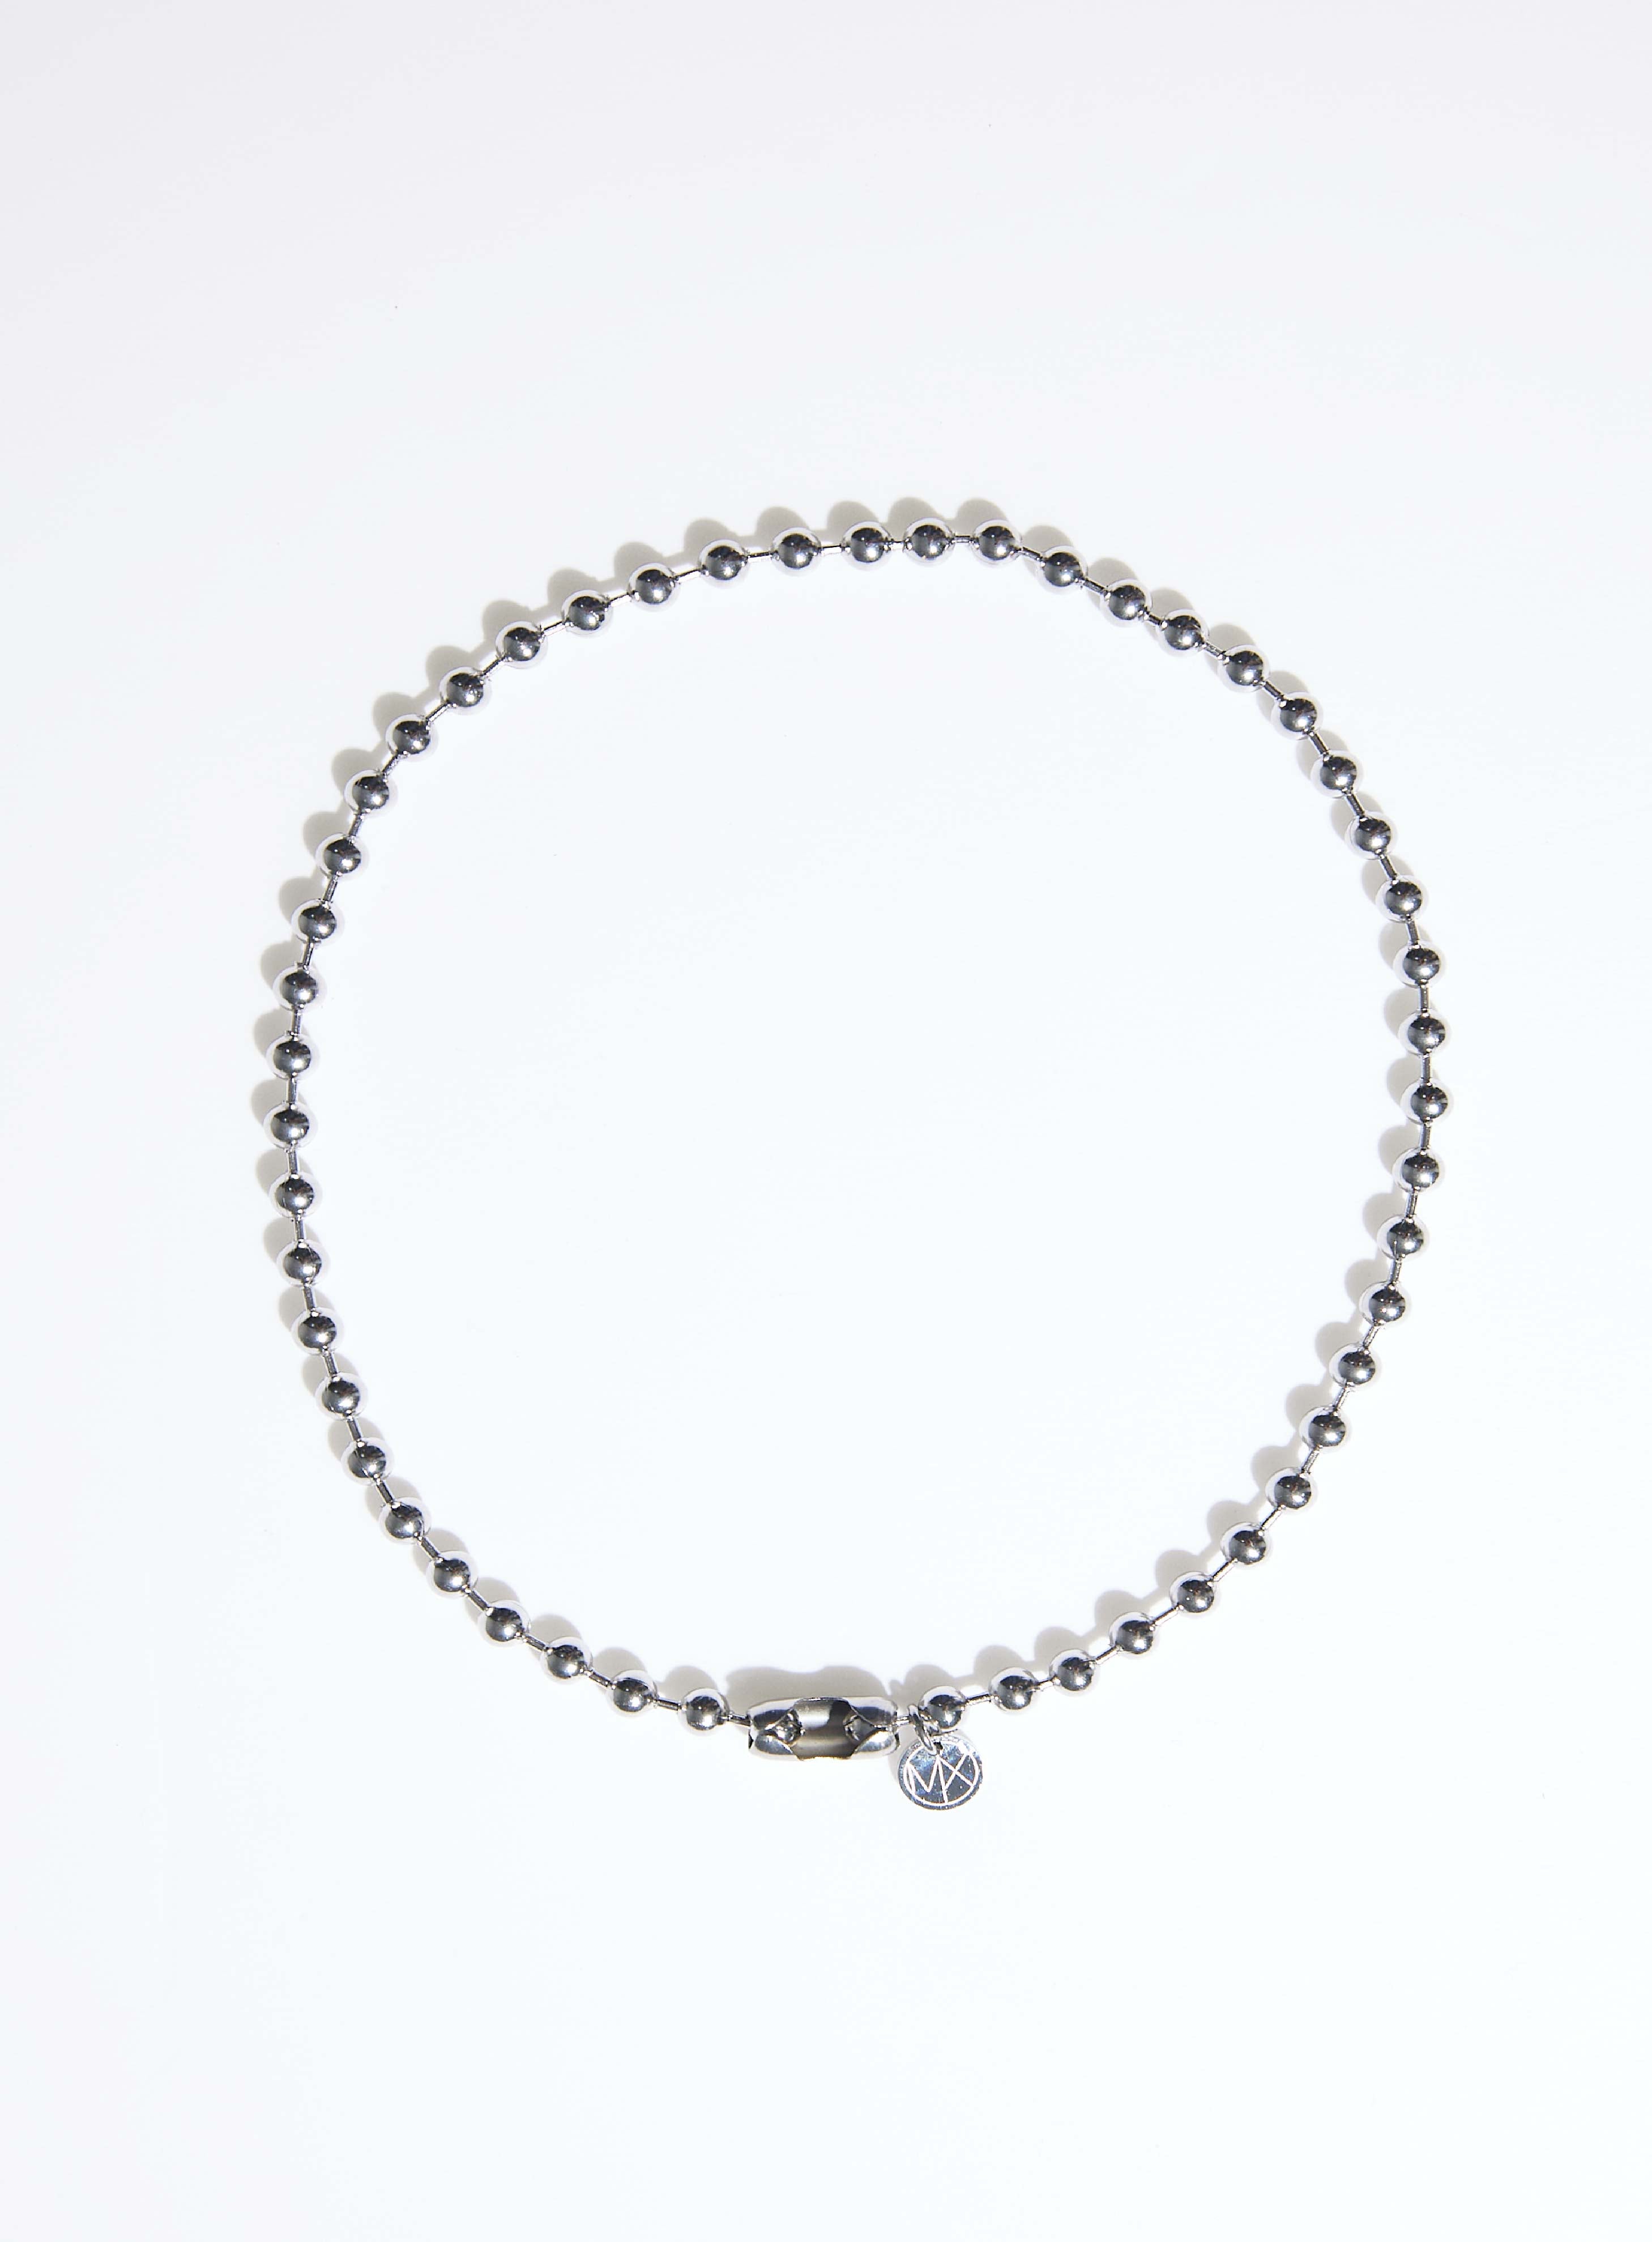 MN012 STAINLESS STEEL NECKLACE